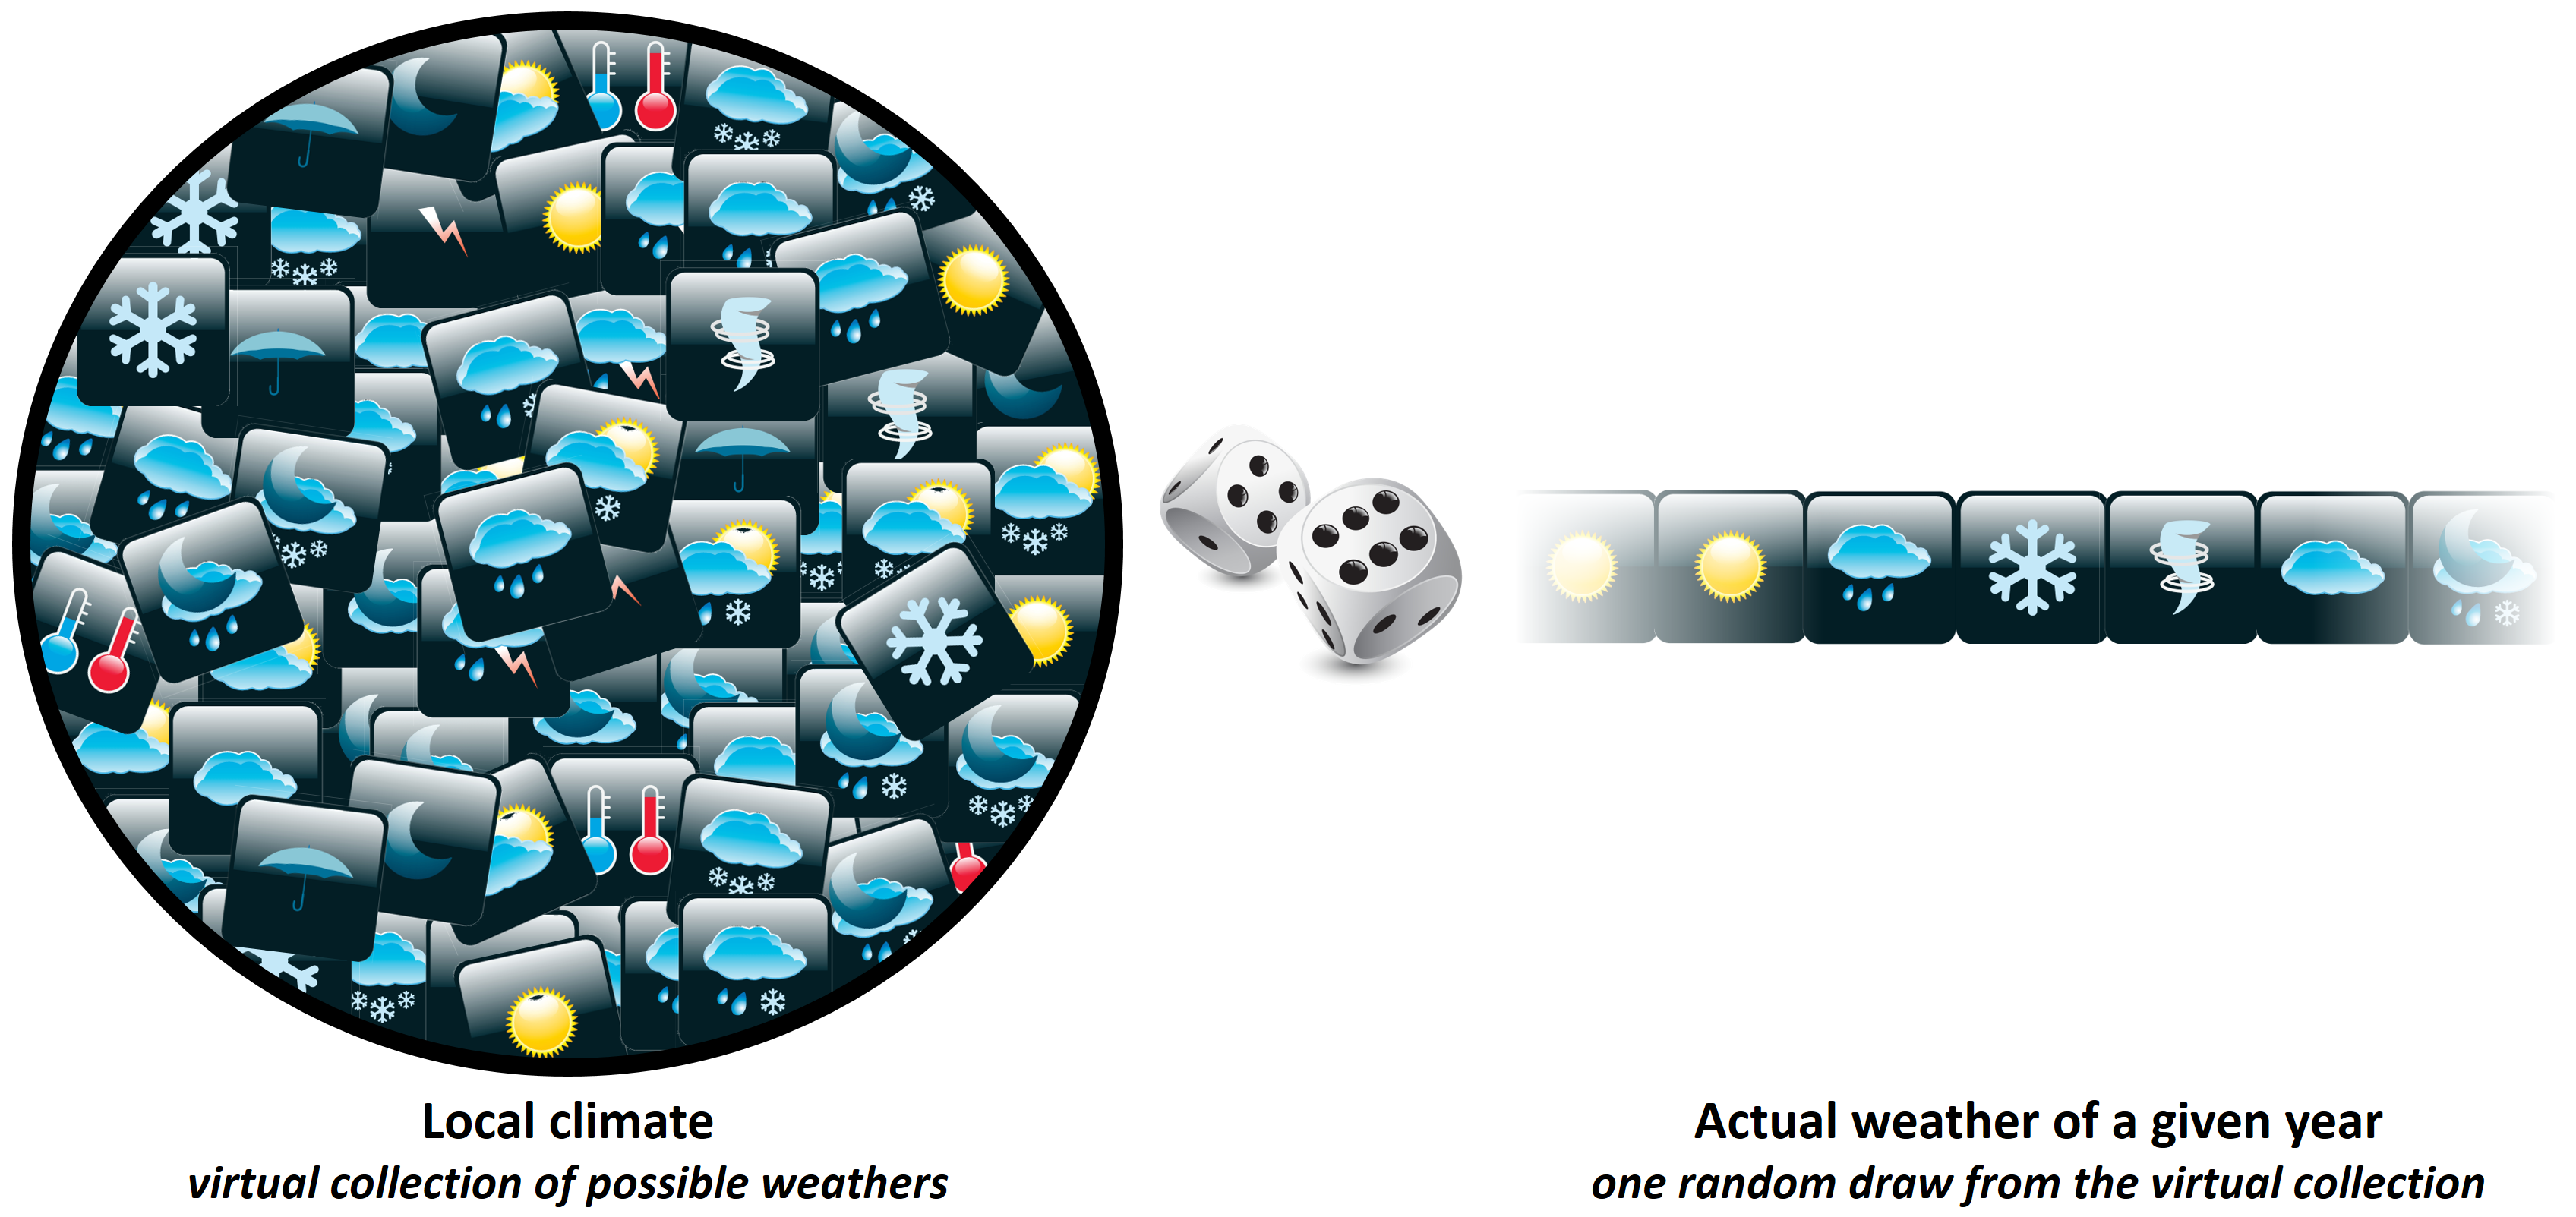 Annual weather can be interpreted as a random draw from the plausible distribution of all possible ‘weathers’.